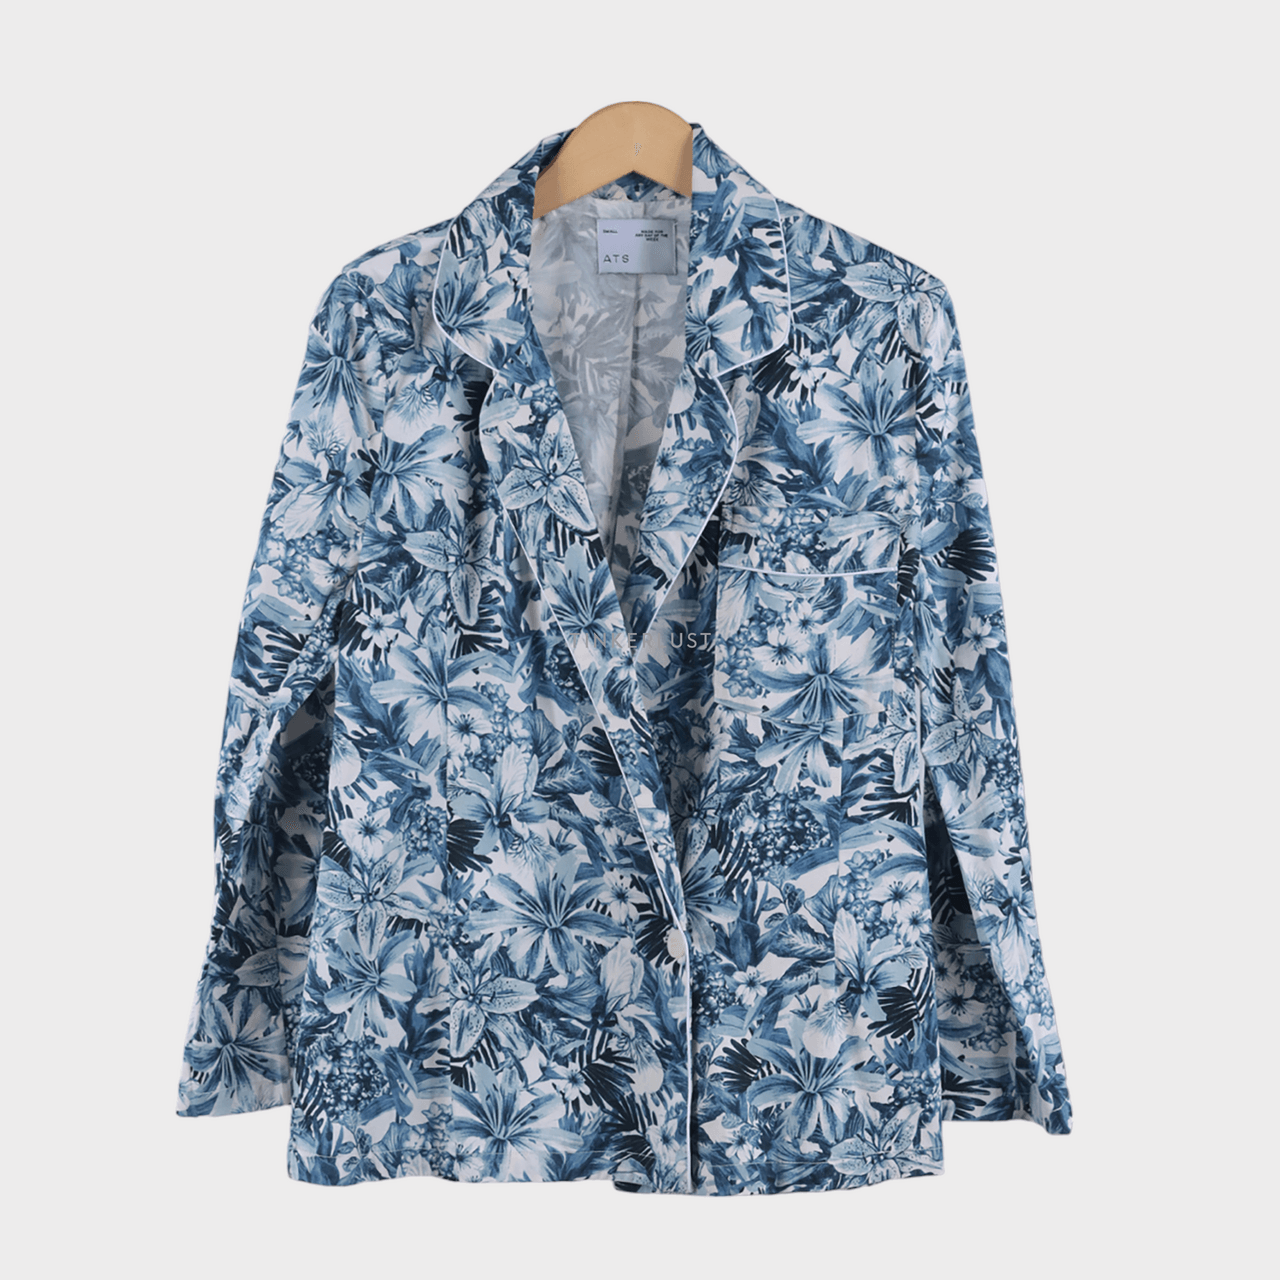 ATS The Label Navy & White Floral Blazer